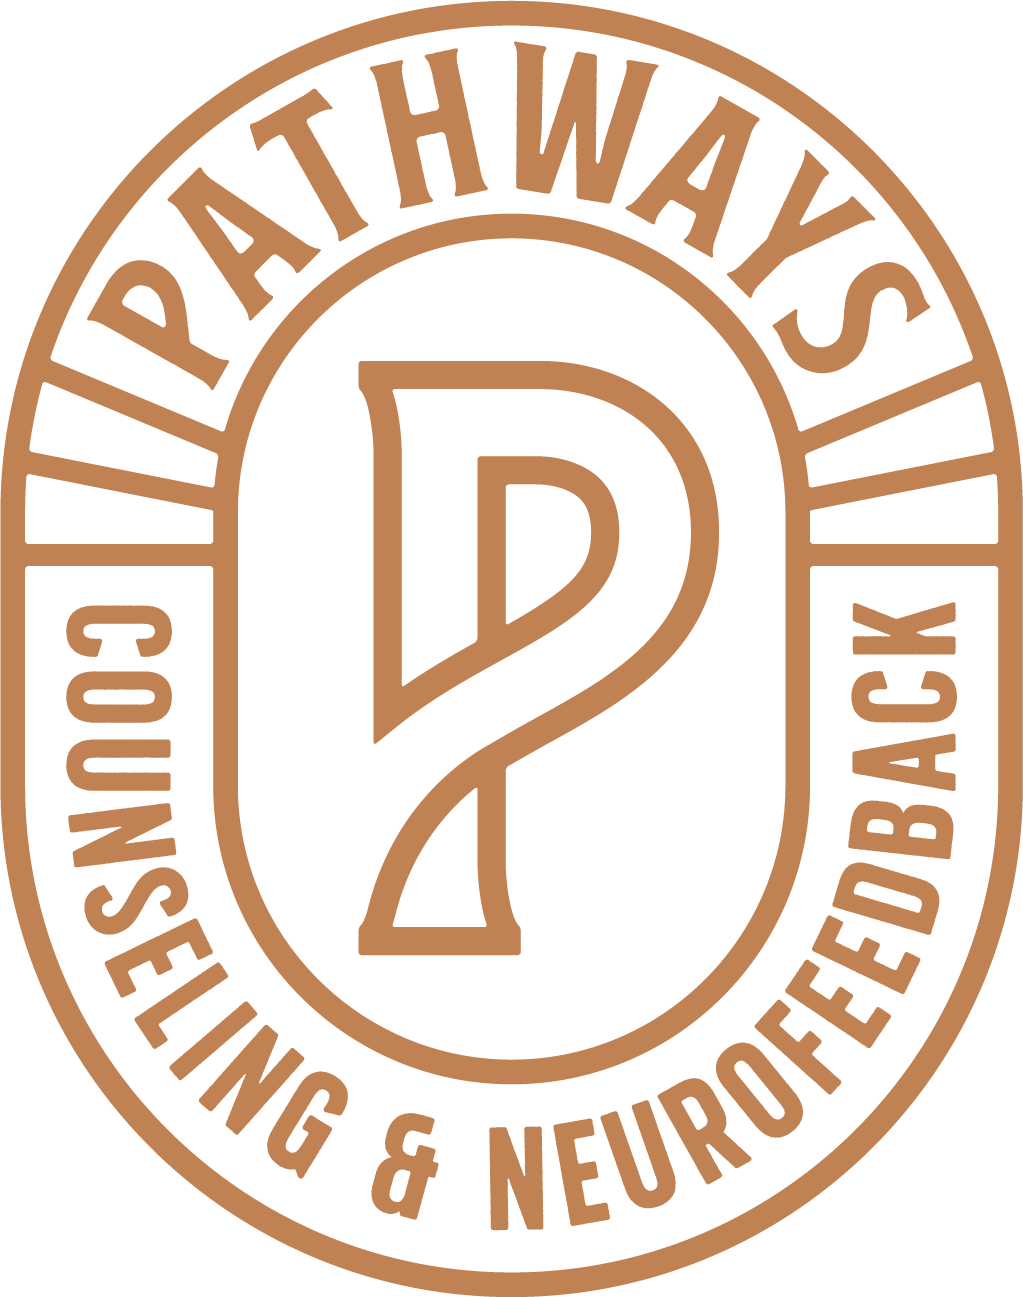 Pathways Counseling and Neurofeedback